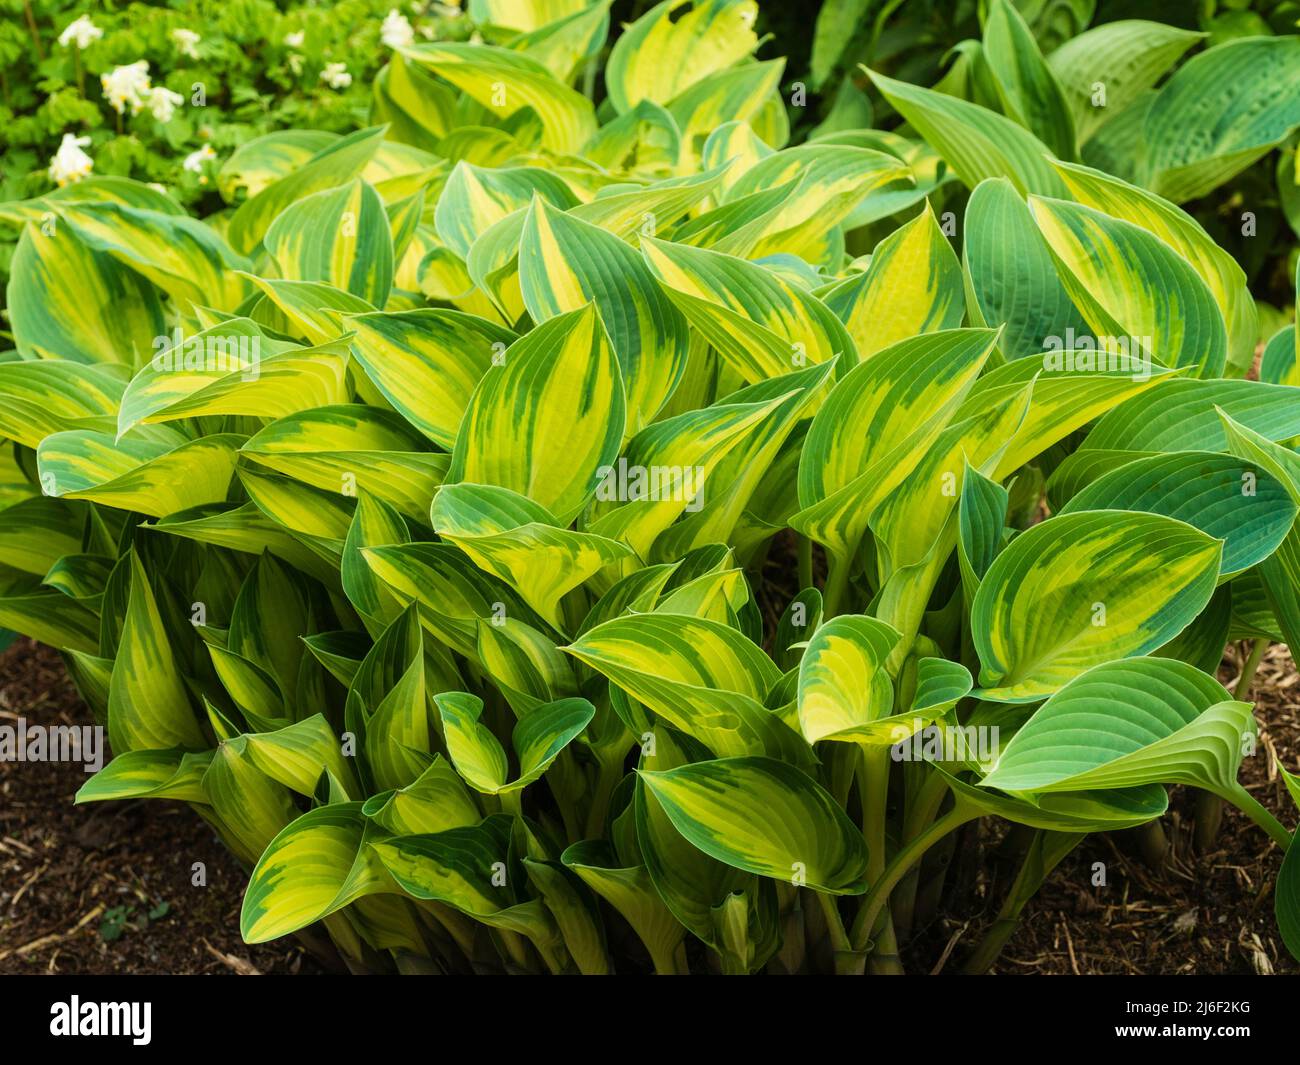 yellow and green spring folage of the broad leaved hardy perennial, Hosta 'June' Stock Photo